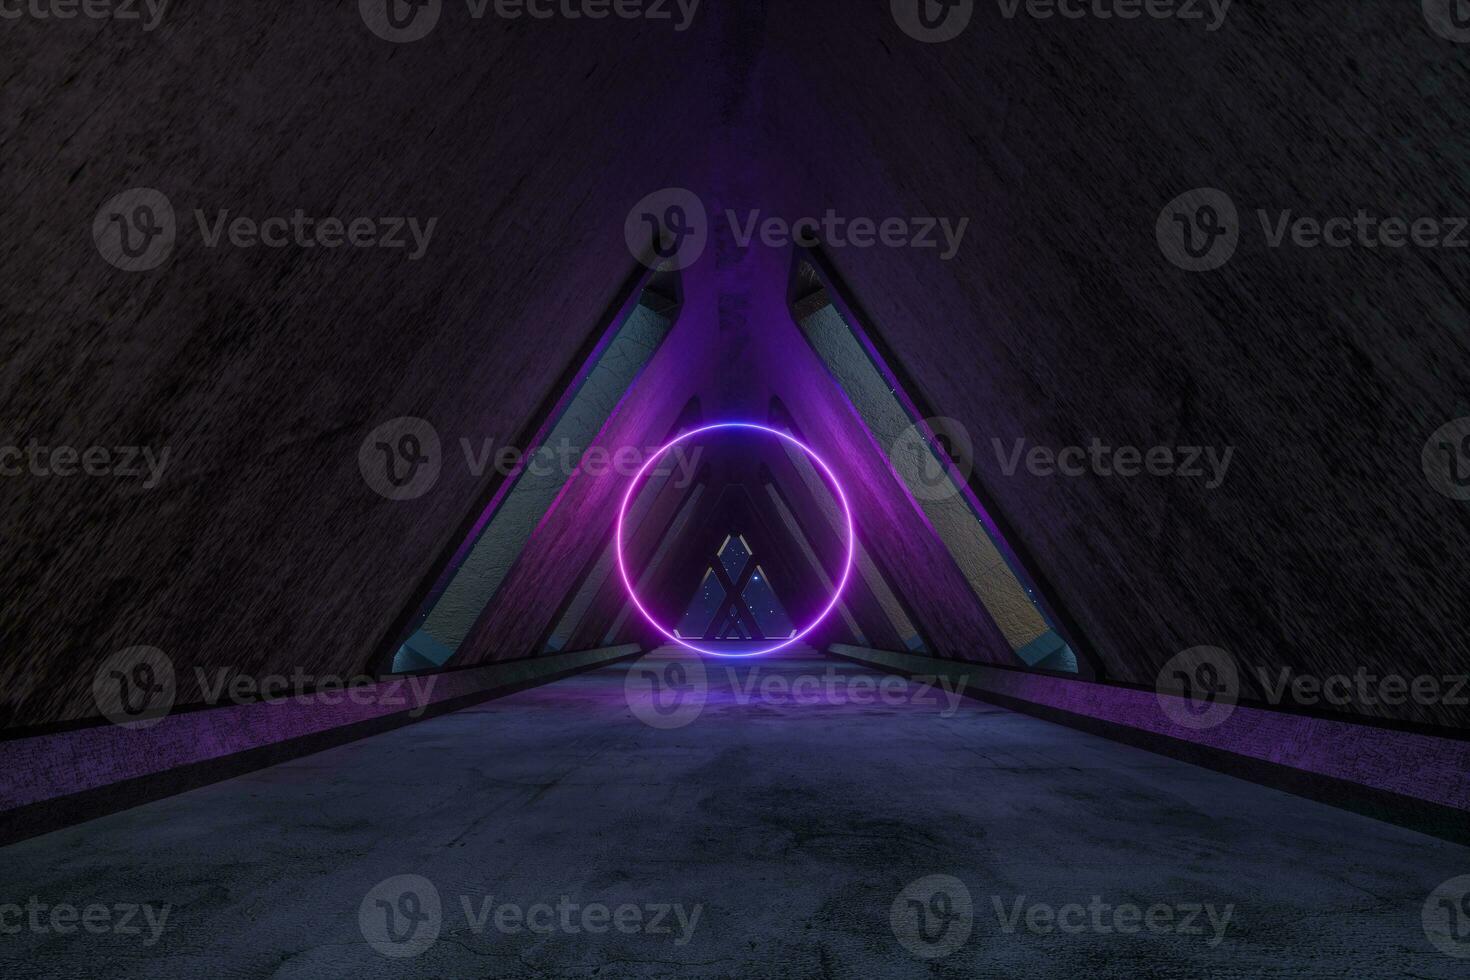 Fantasy concrete tunnel building with glowing neon light. 3d rendering. photo